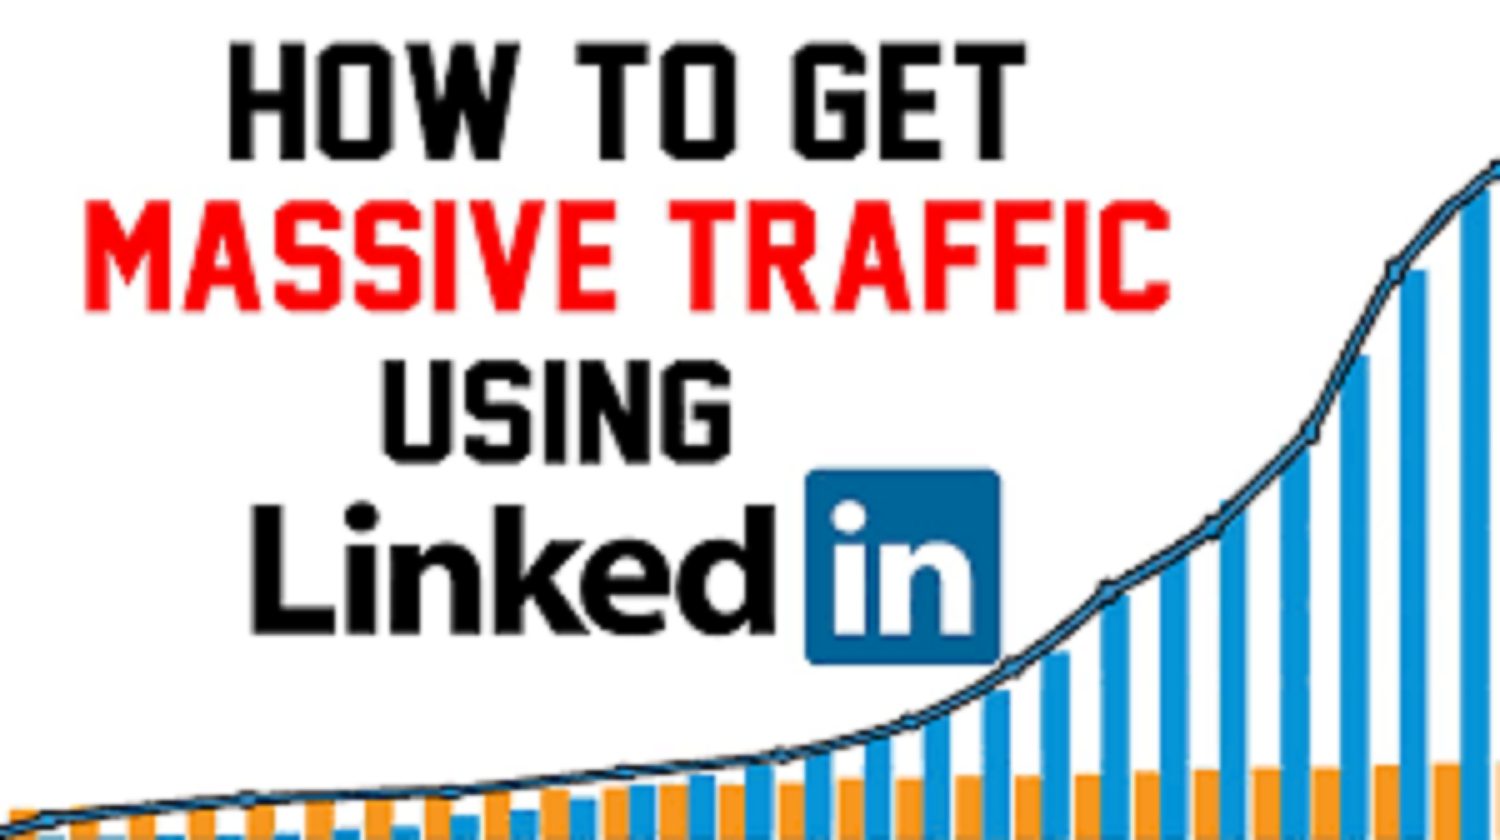 Promote your website in top 5 LinkedIn groups with over 4 million professionals